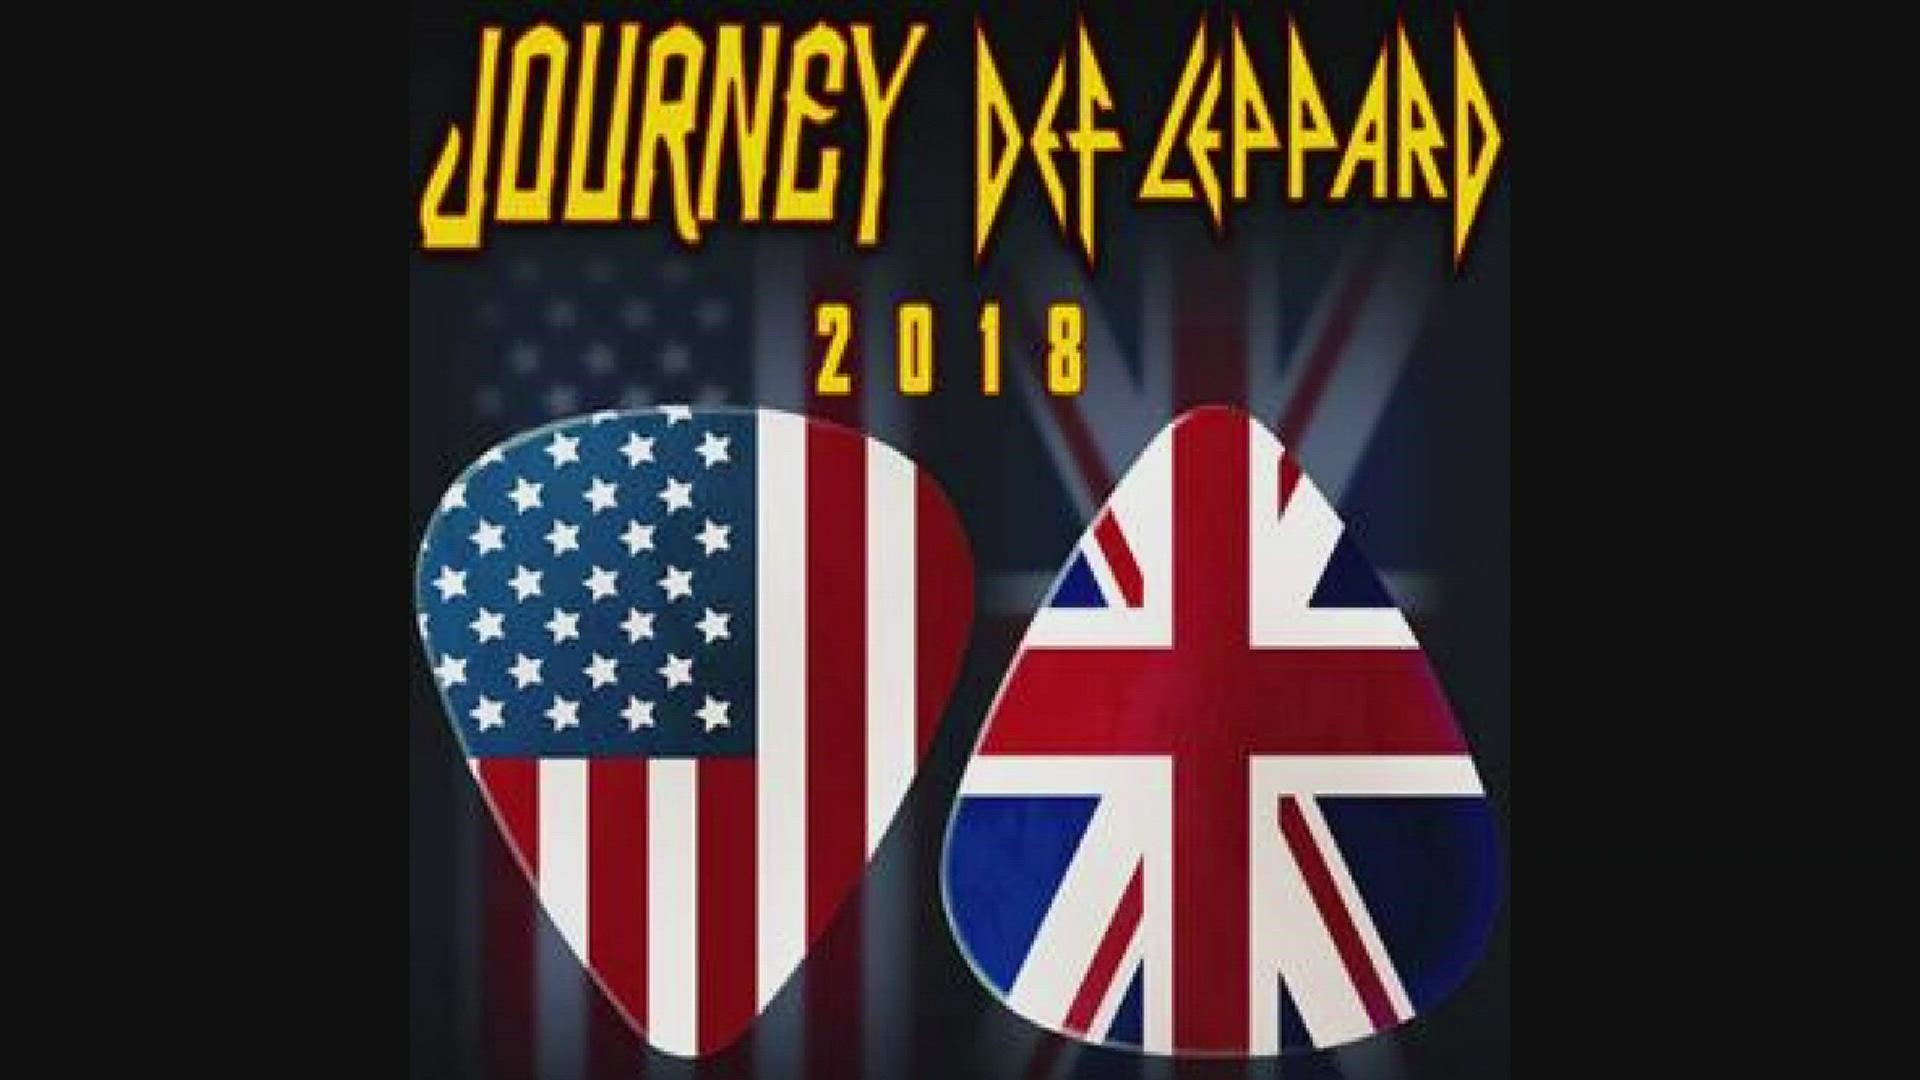 No "Foolin'" here. Journey and Def Leppard are teaming up for a big tour, and Phoenix will be one of their stops across the U.S.